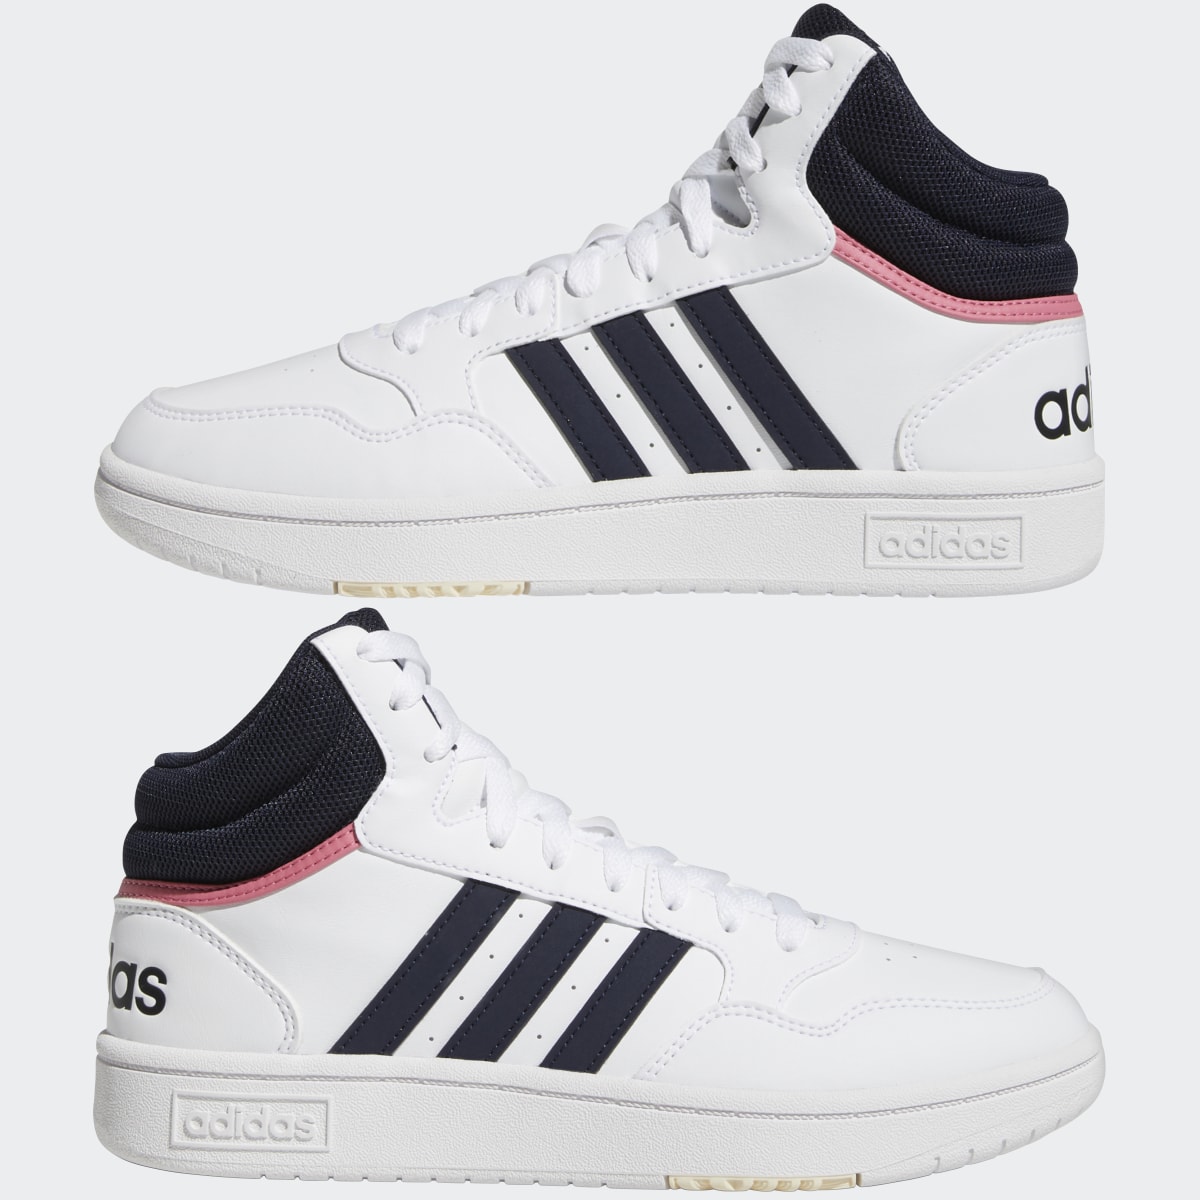 Adidas Hoops 3.0 Mid Classic Shoes. 8